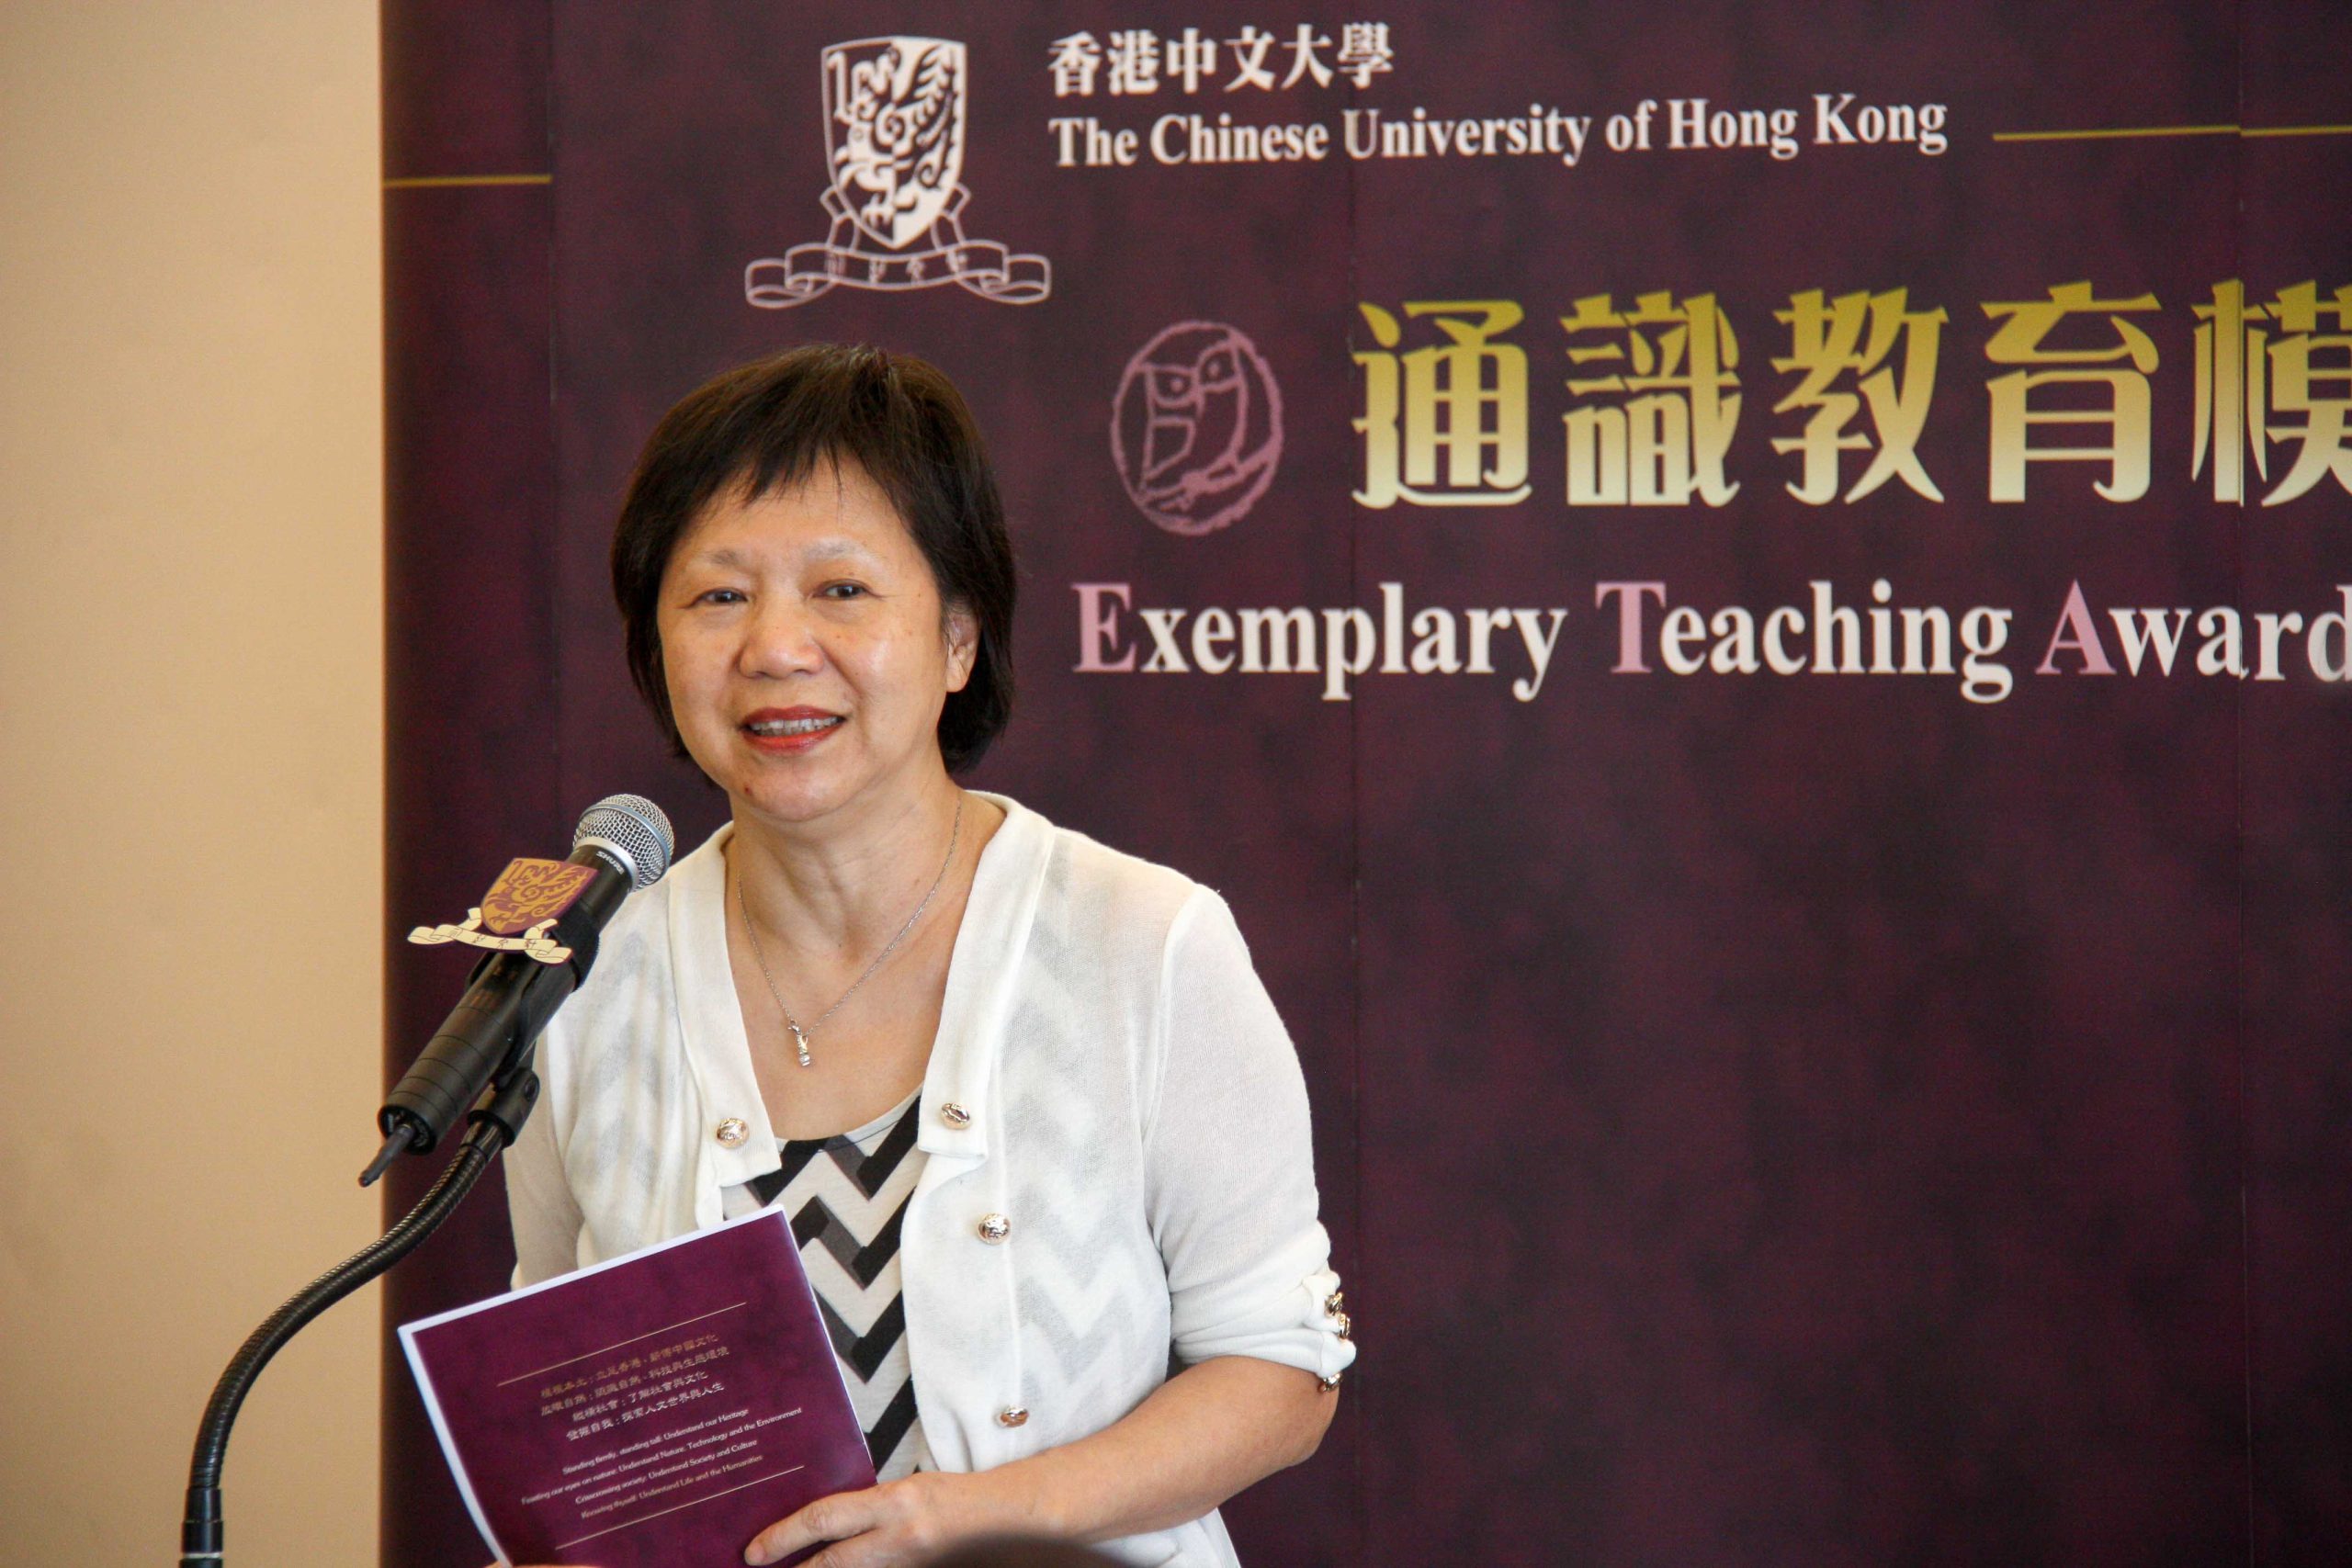 Introduction of Professor Chan Chi Ho Wallace by Professor Lam Ching Man, Vice-Chairperson of the Department of Social Work